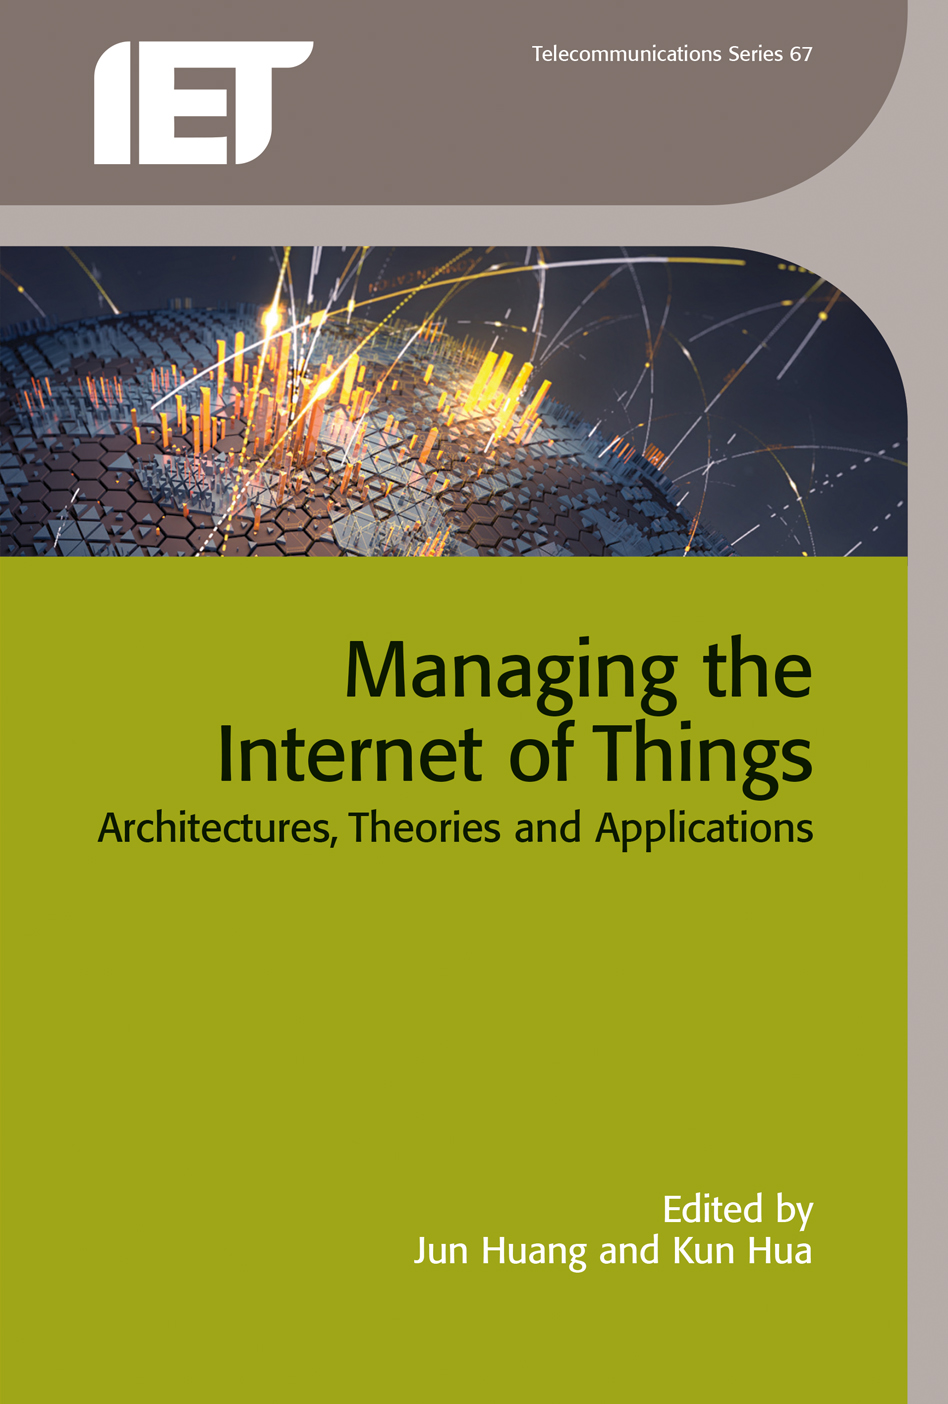 Managing the Internet of Things, Architectures, theories and applications